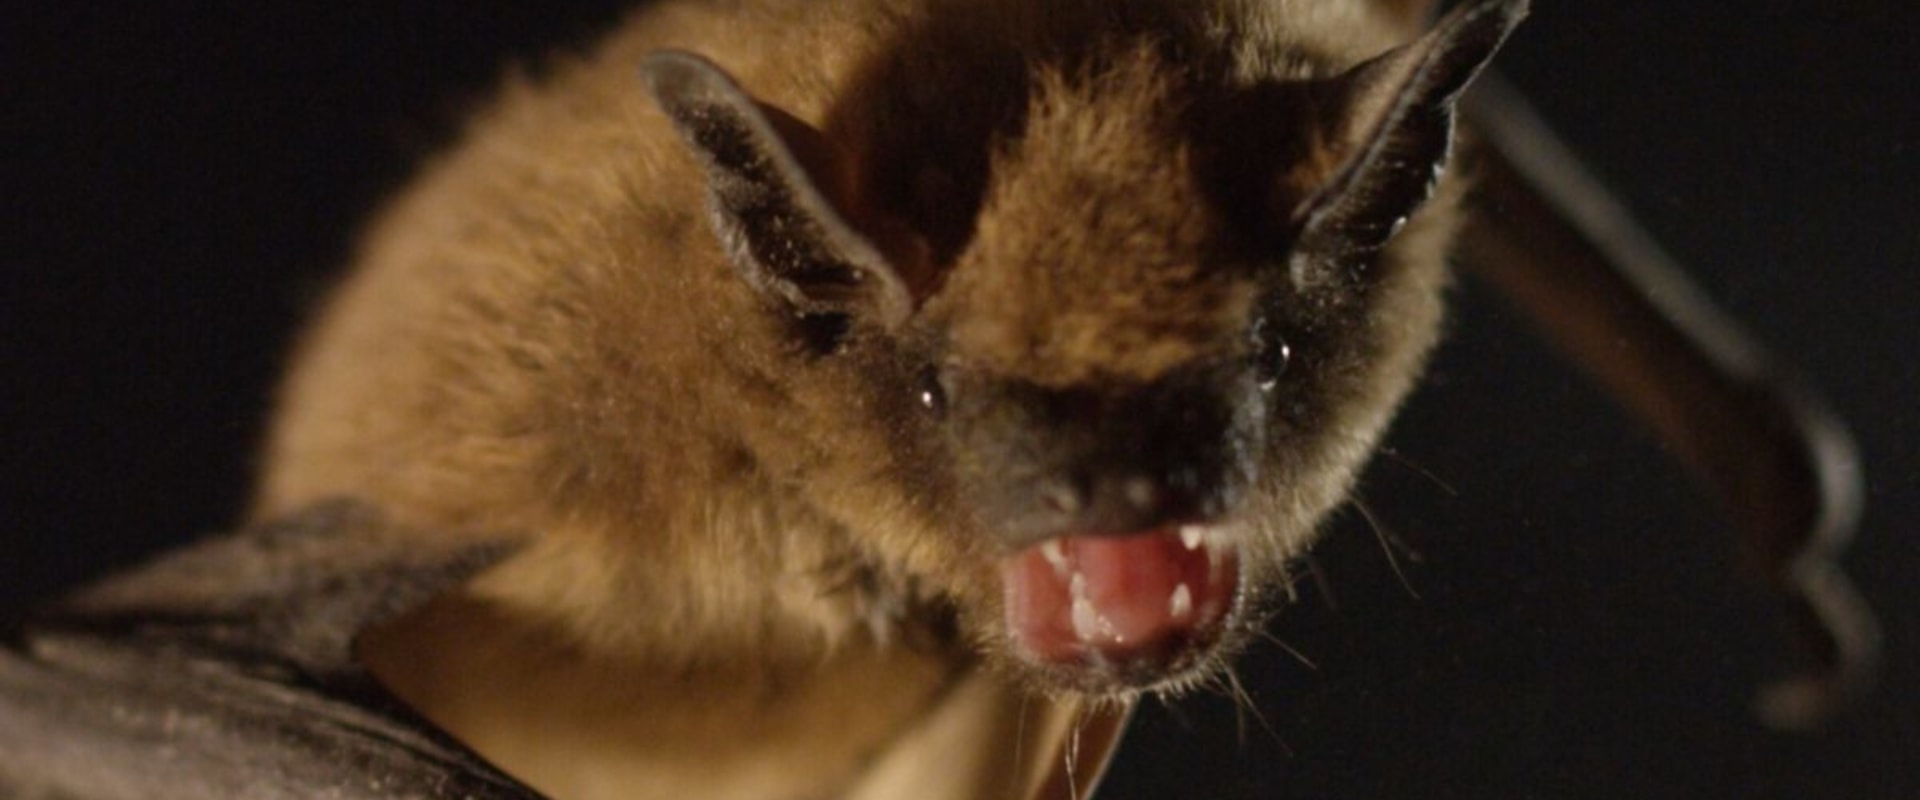 Can bats in the attic make you sick?